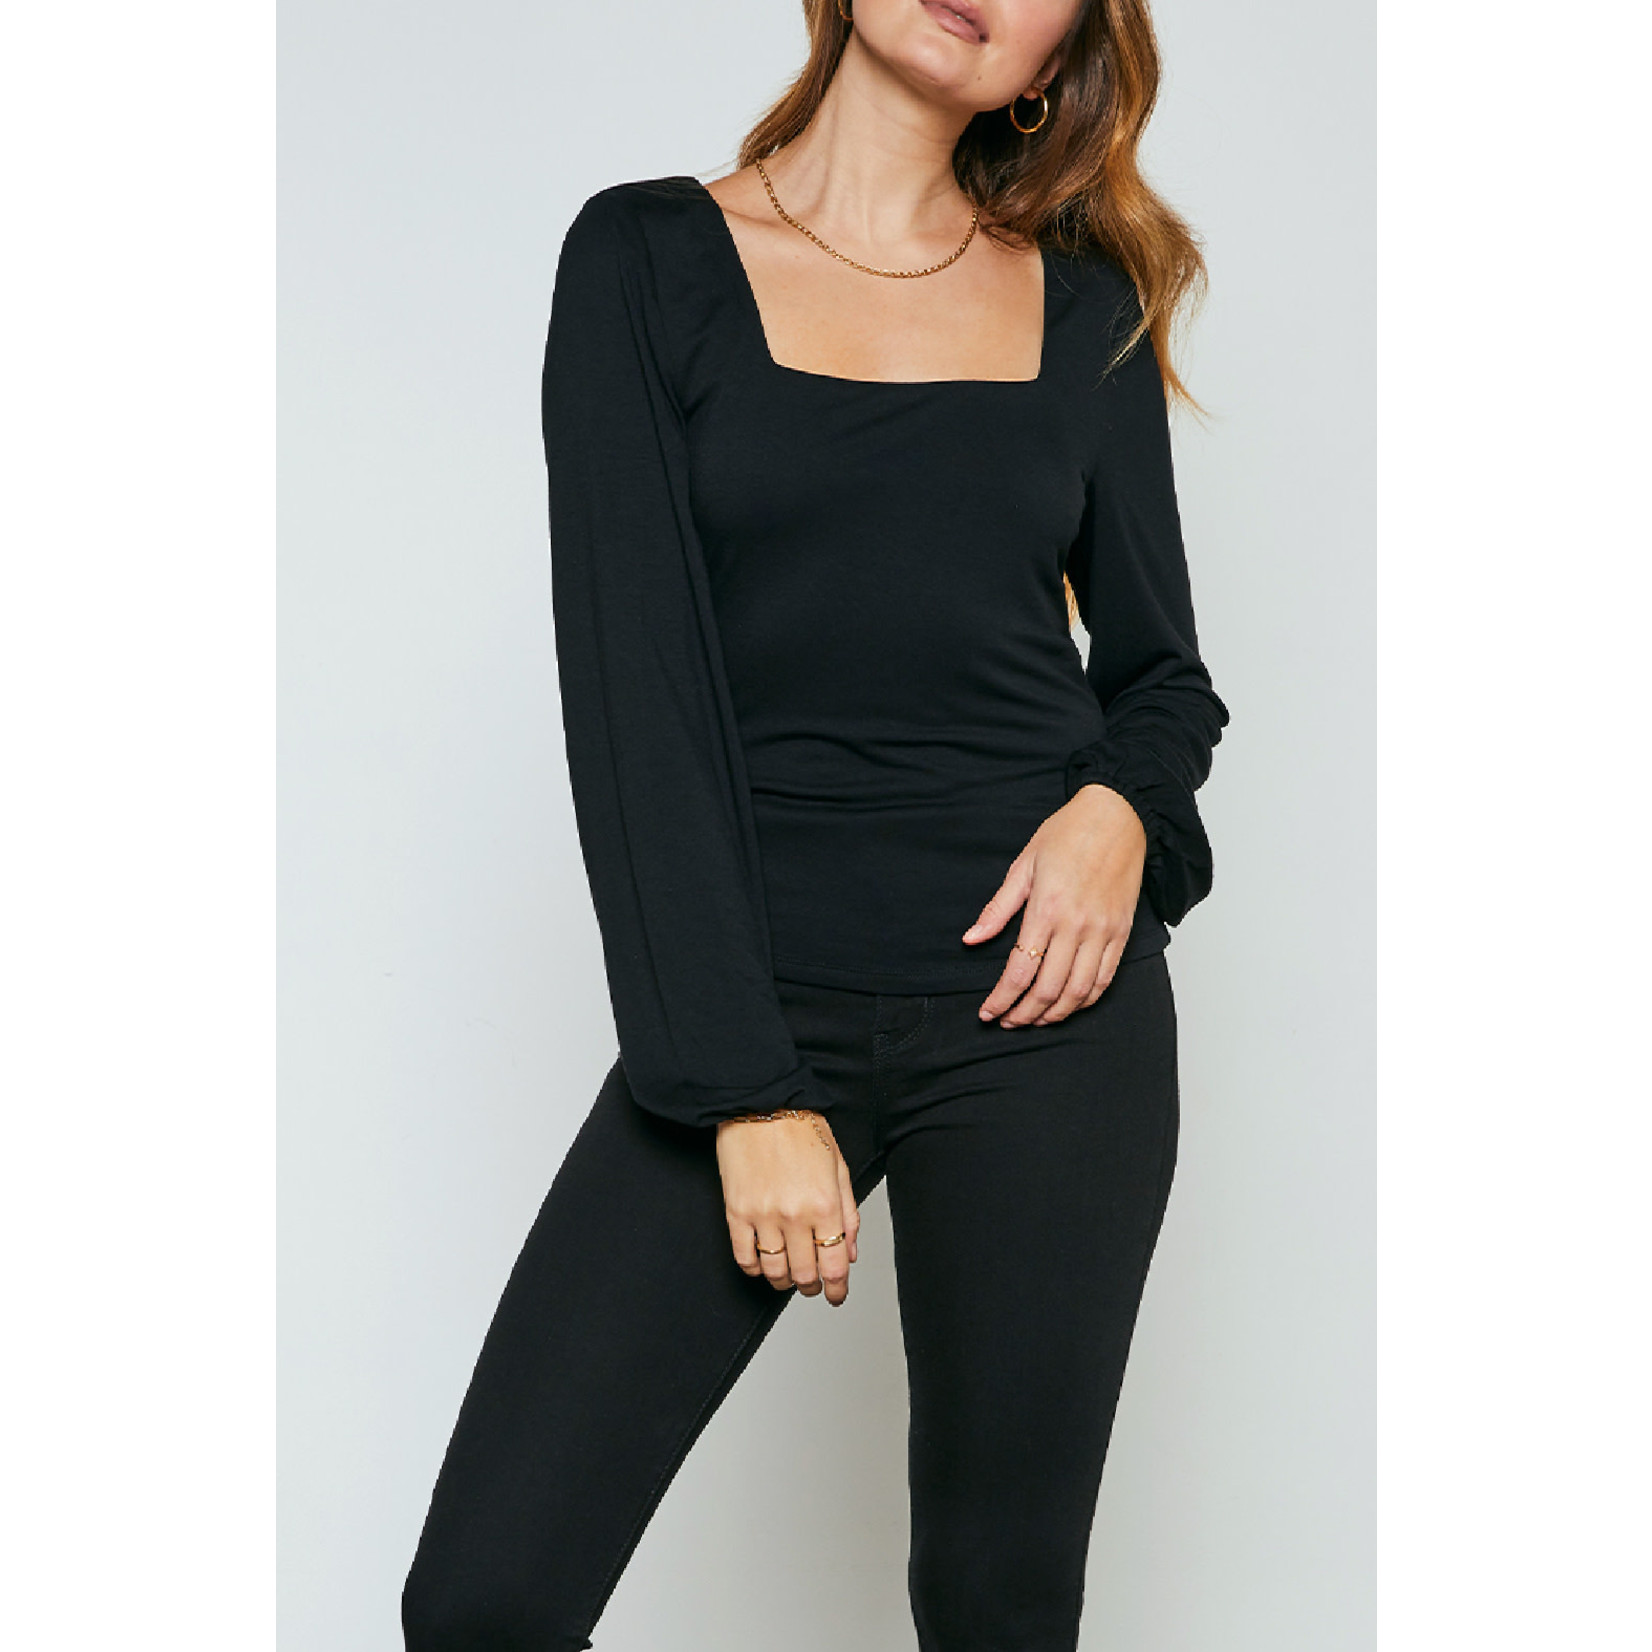 Gentle Fawn Double Layered Square Neckline top